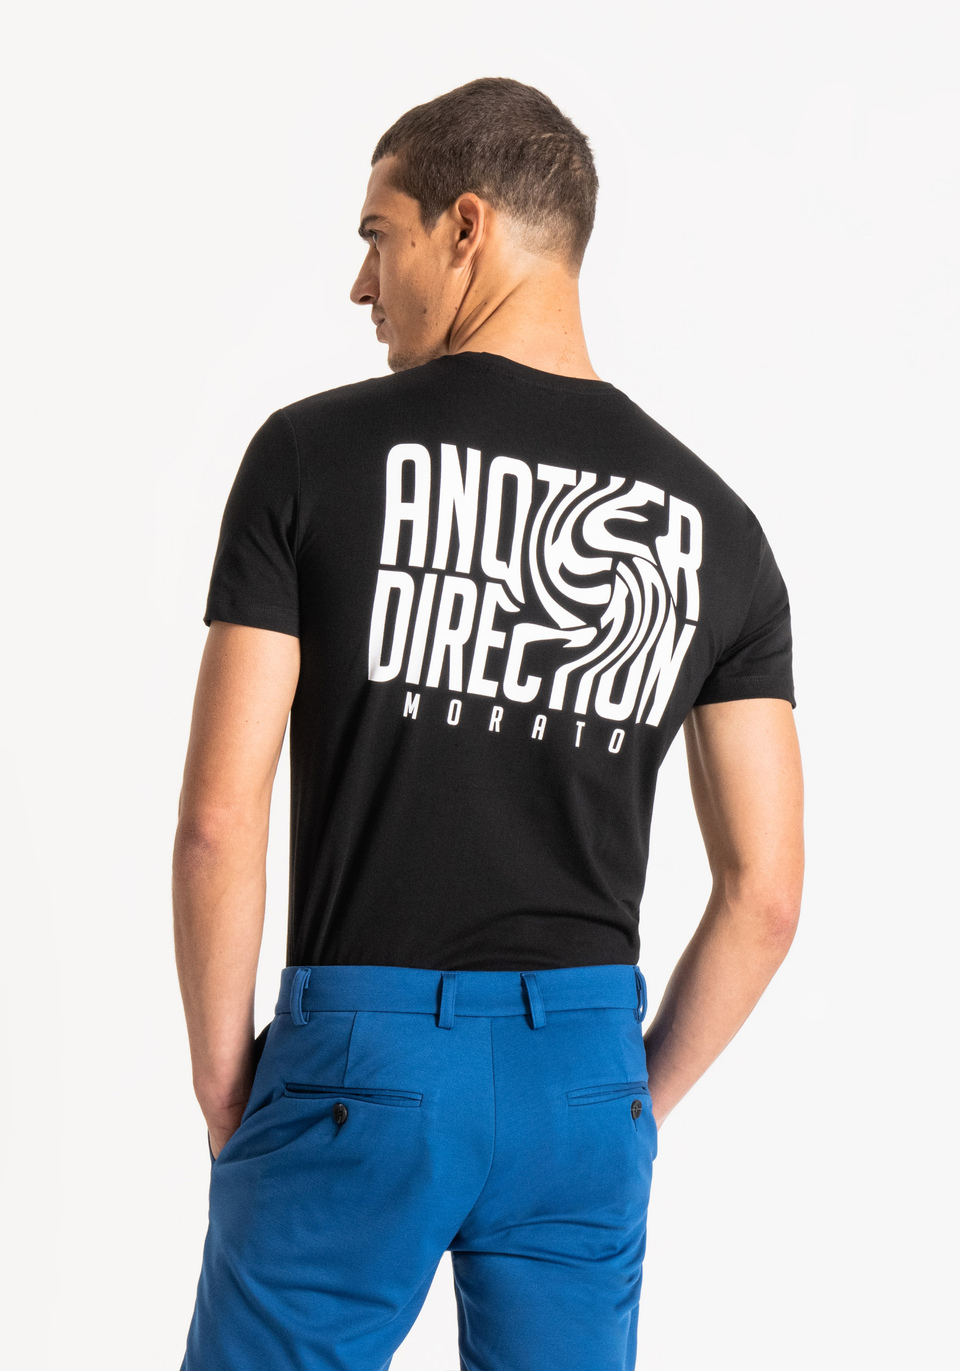 SLIM-FIT T-SHIRT IN STRETCHY COTTON - Antony Morato Online Shop